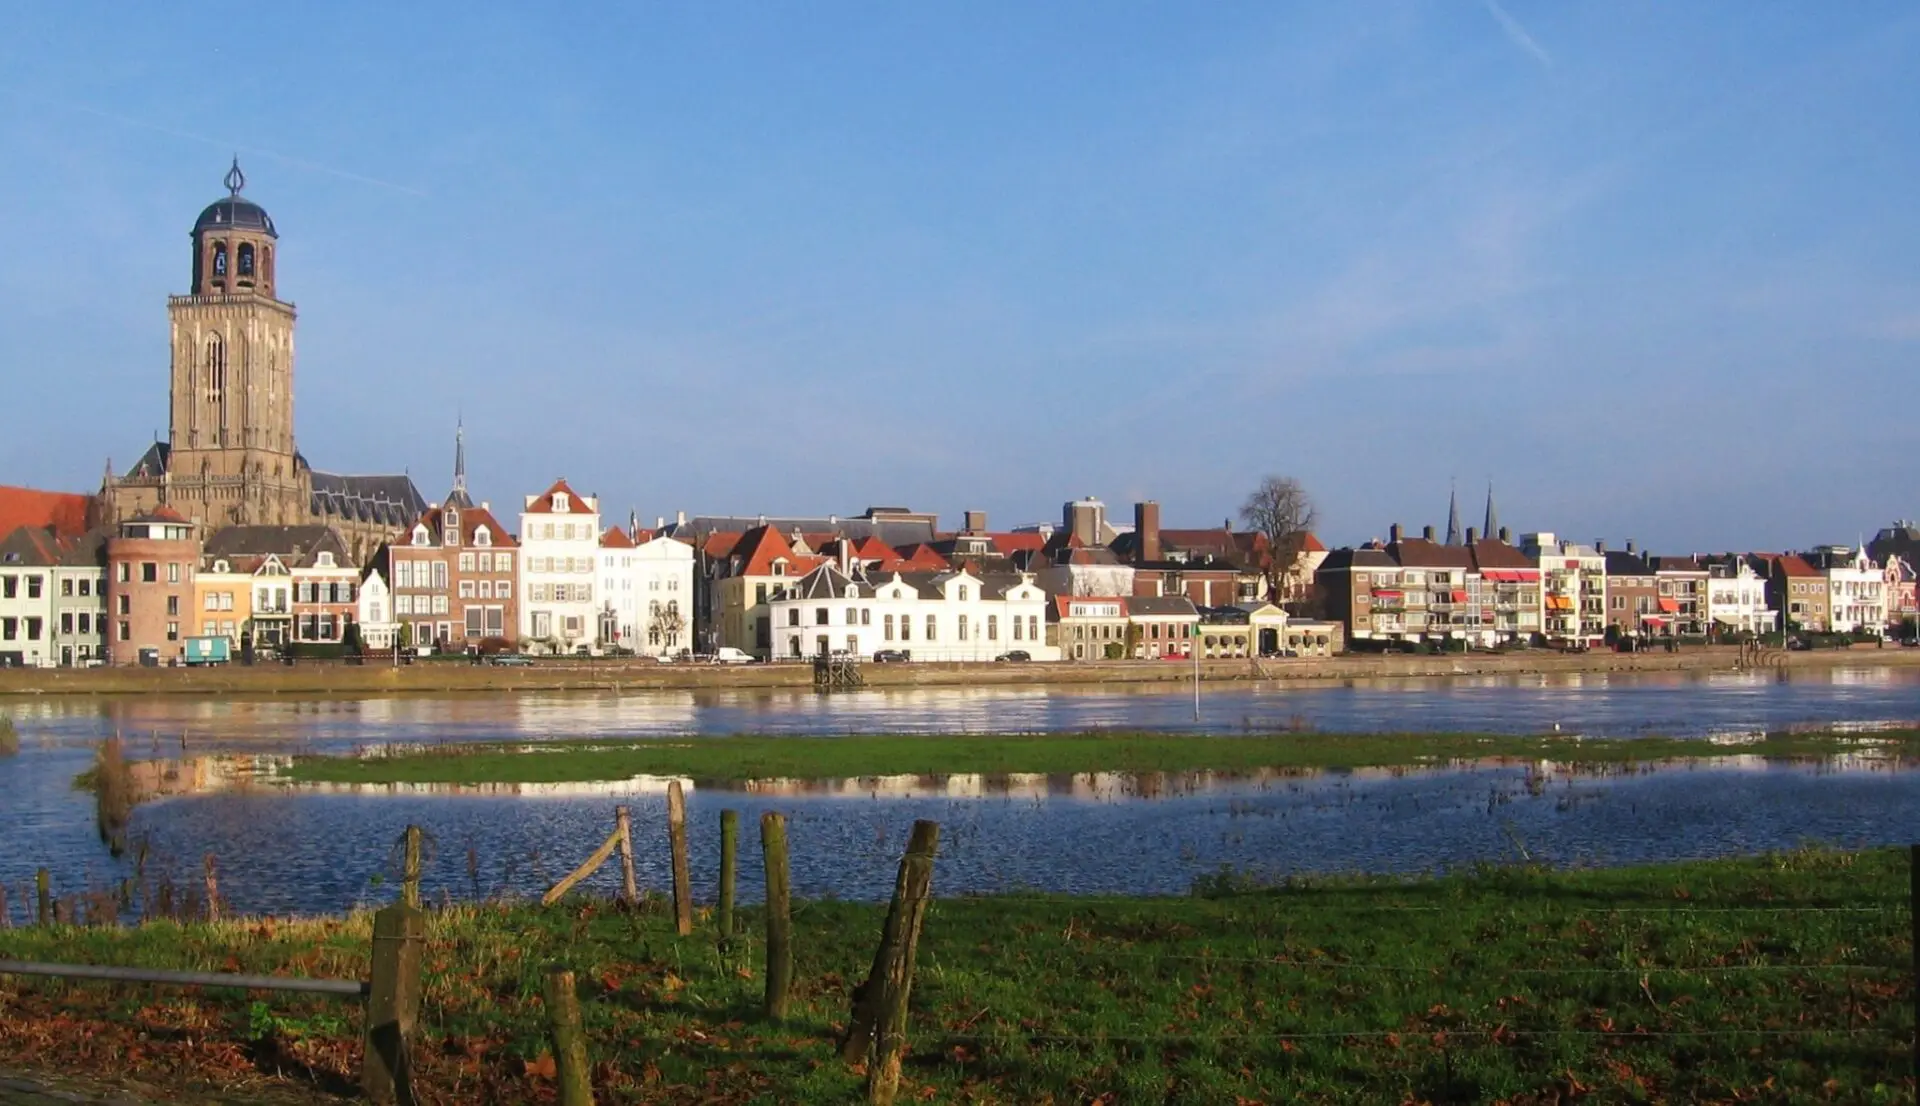 10 Facts You Might Not Know About Deventer